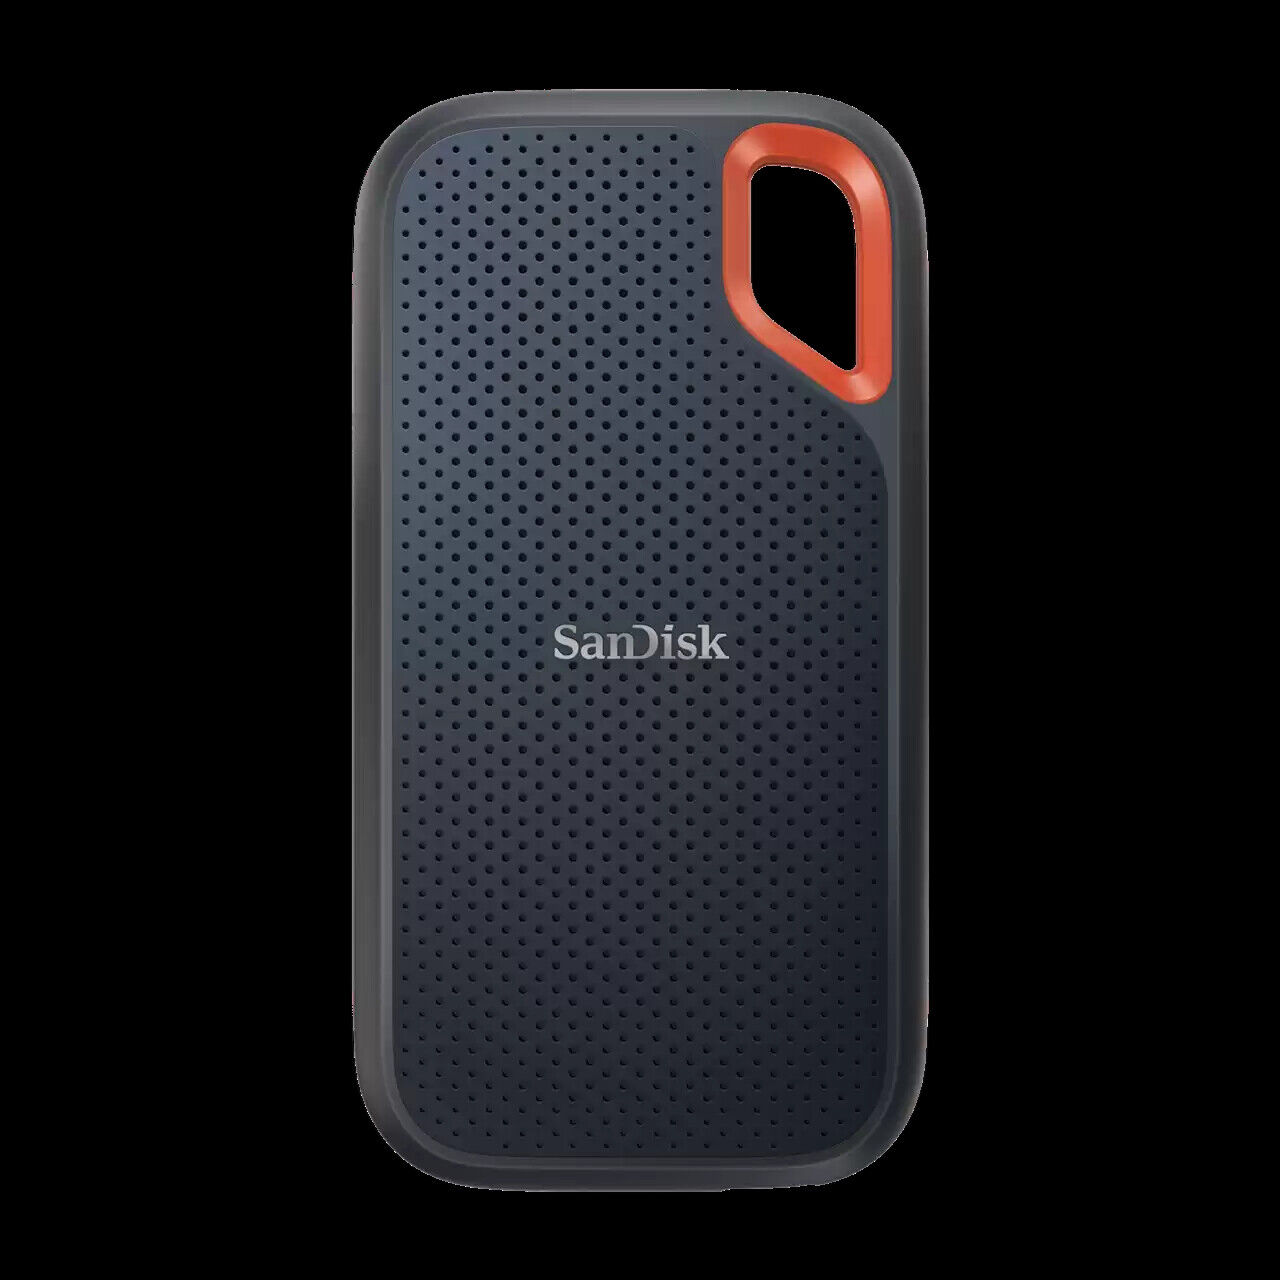 SanDisk 1TB Extreme Portable SSD, External Solid State Drive - SDSSDE61-1T00-G25